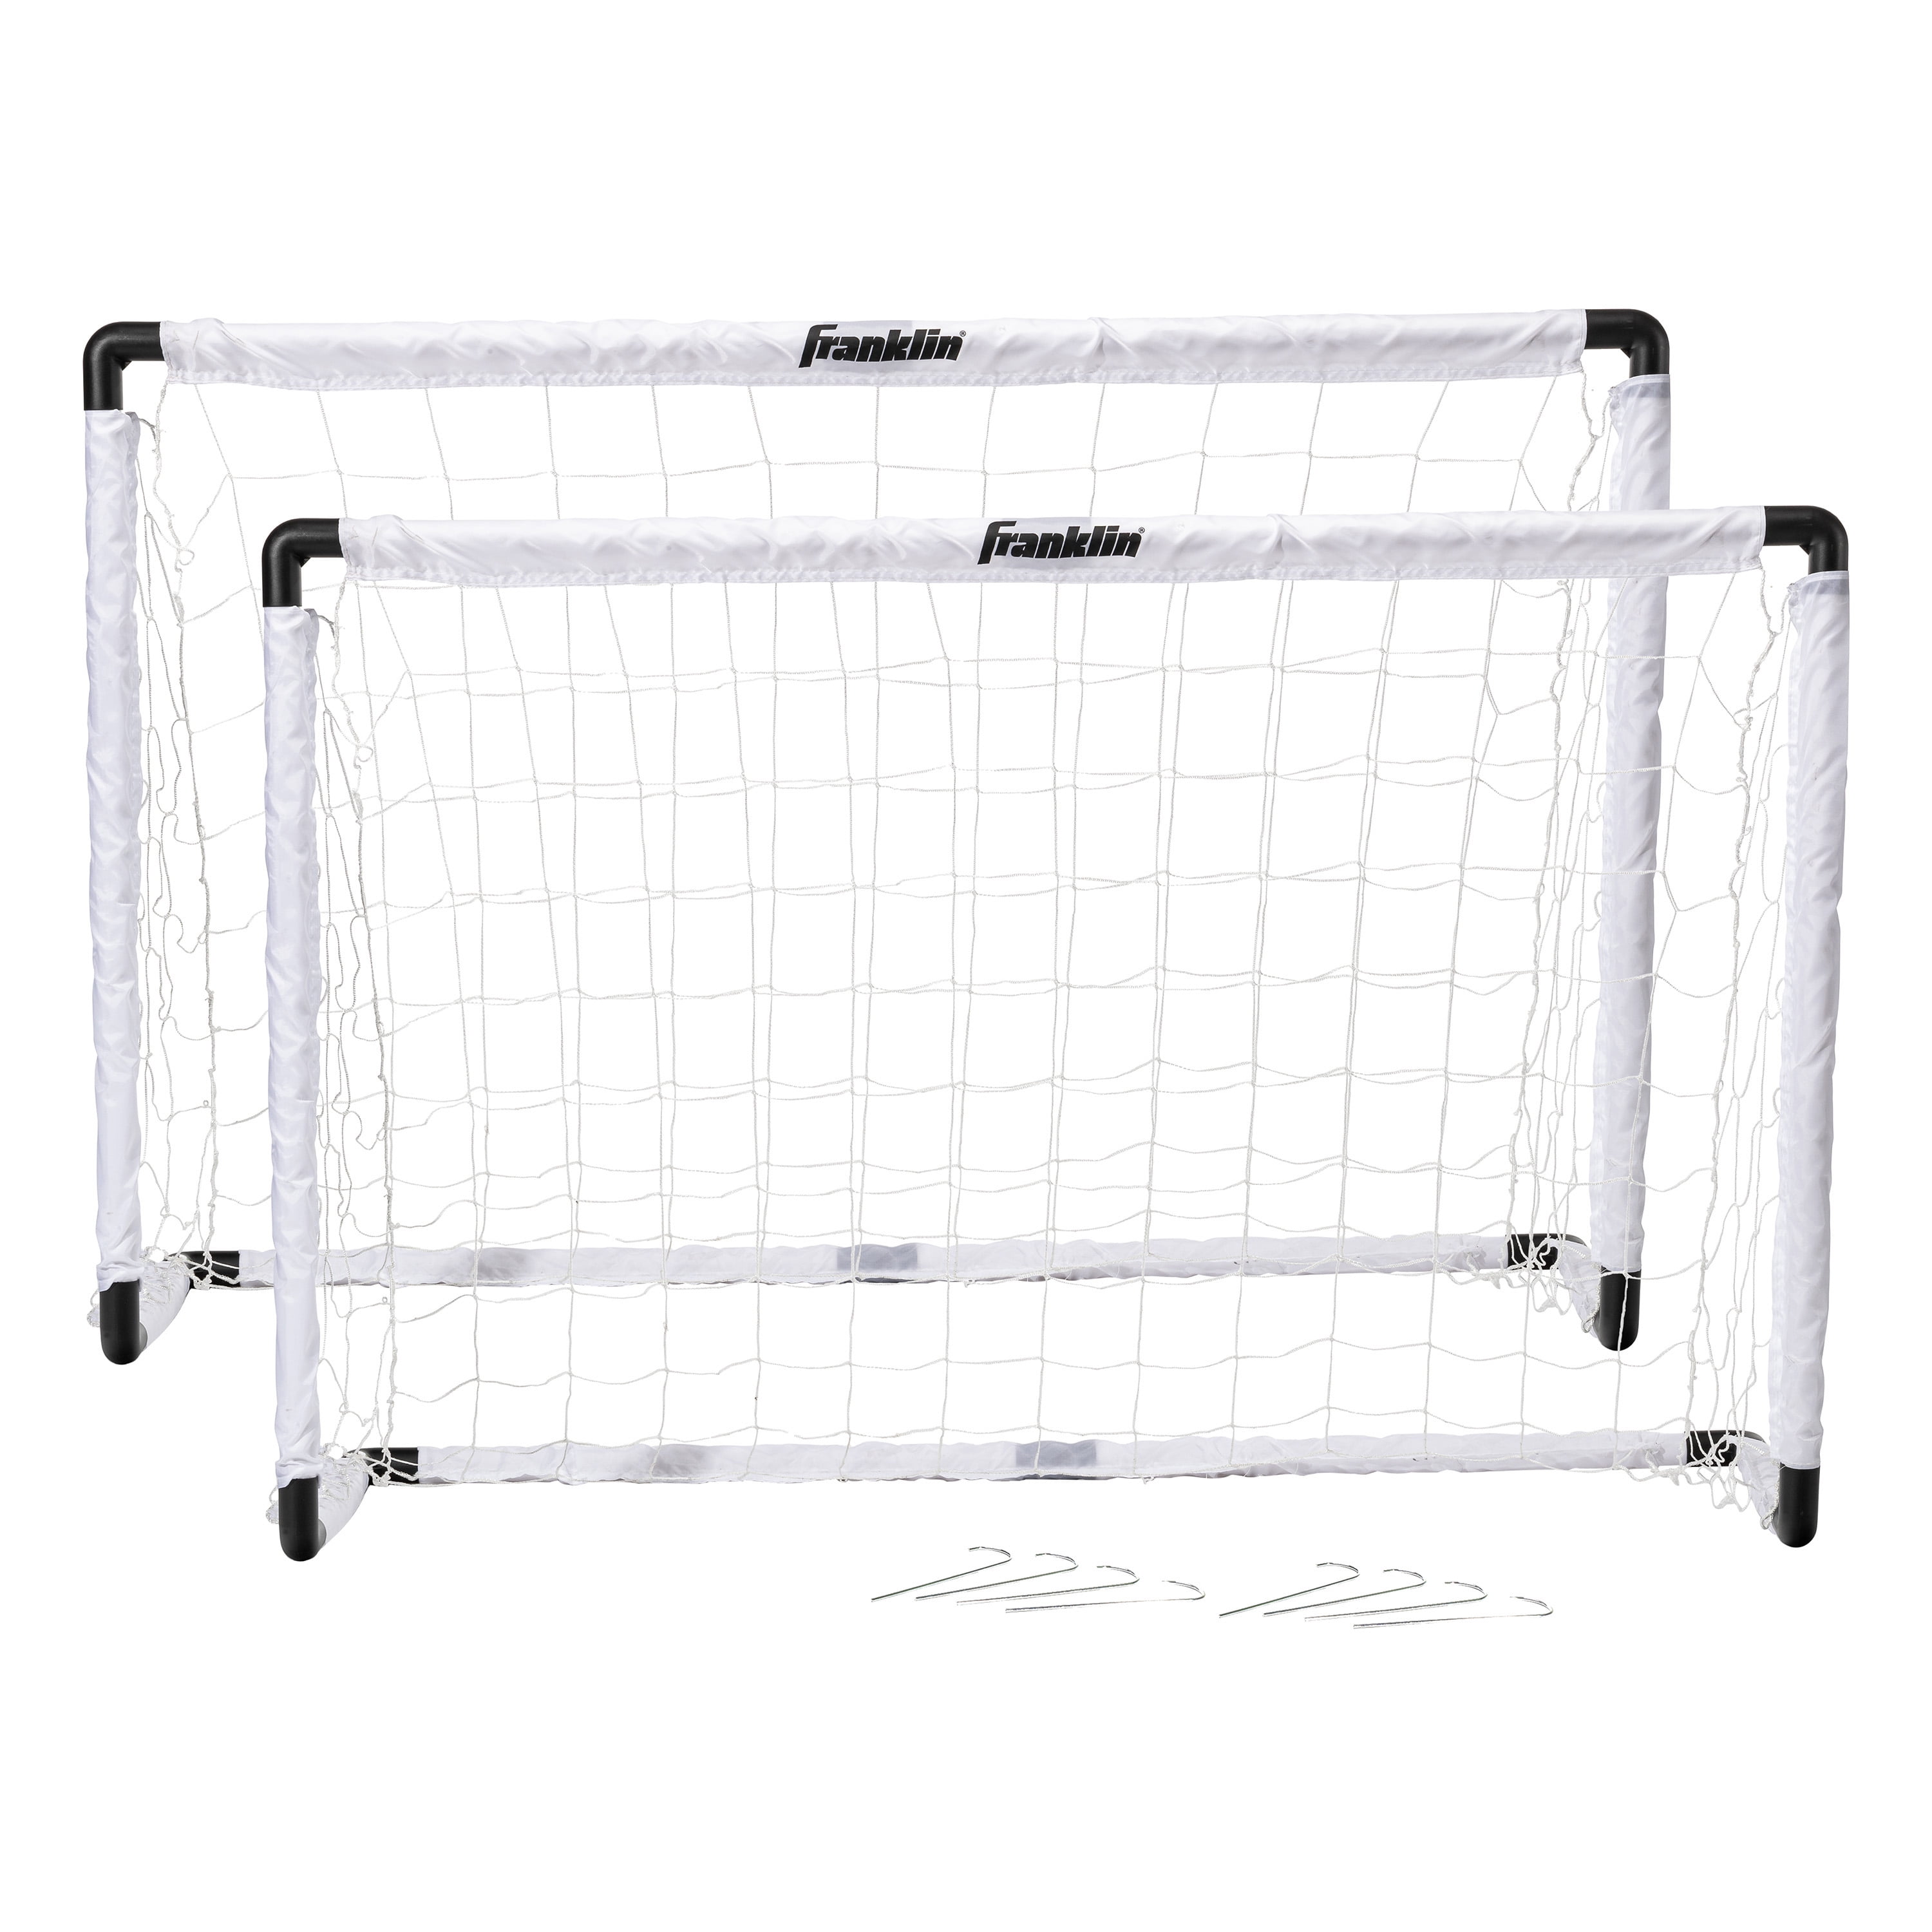 Franklin Sports 14266 Airtech Football Goal Post for sale online 